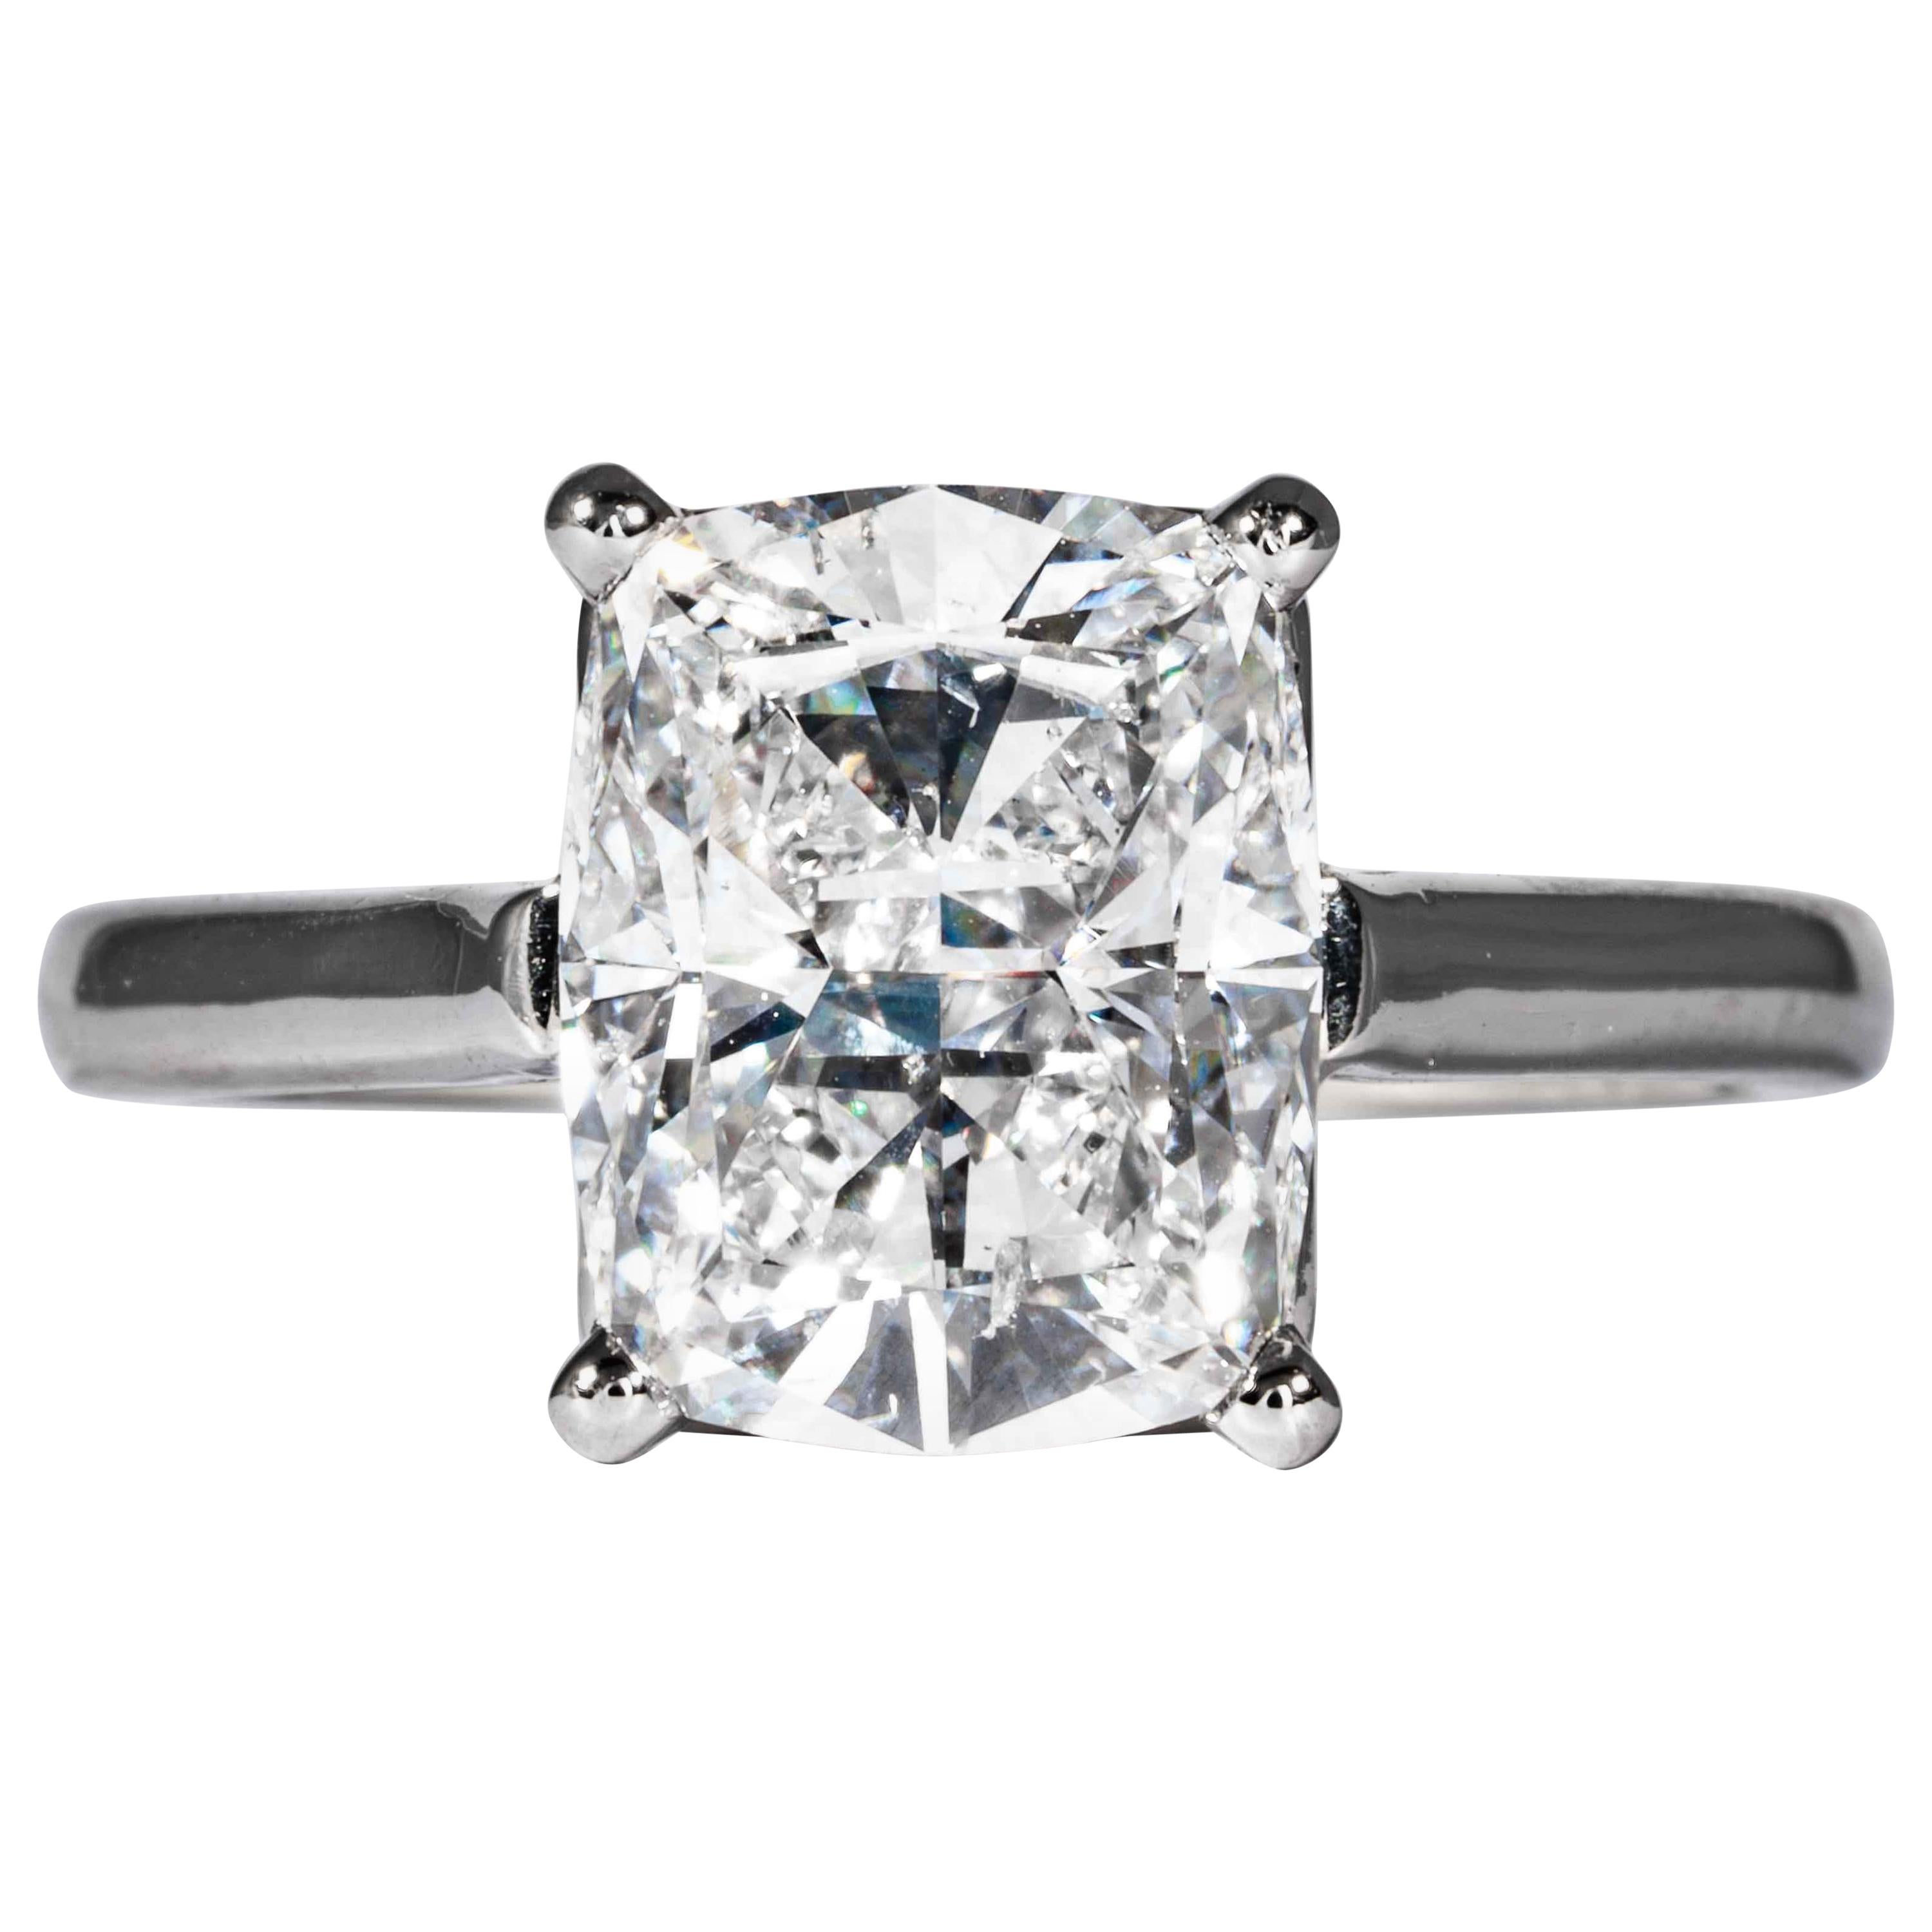 Tiffany & Co. GIA Certified 3.05 Carat D SI1 Cushion Cut Diamond Solitaire Ring For Sale